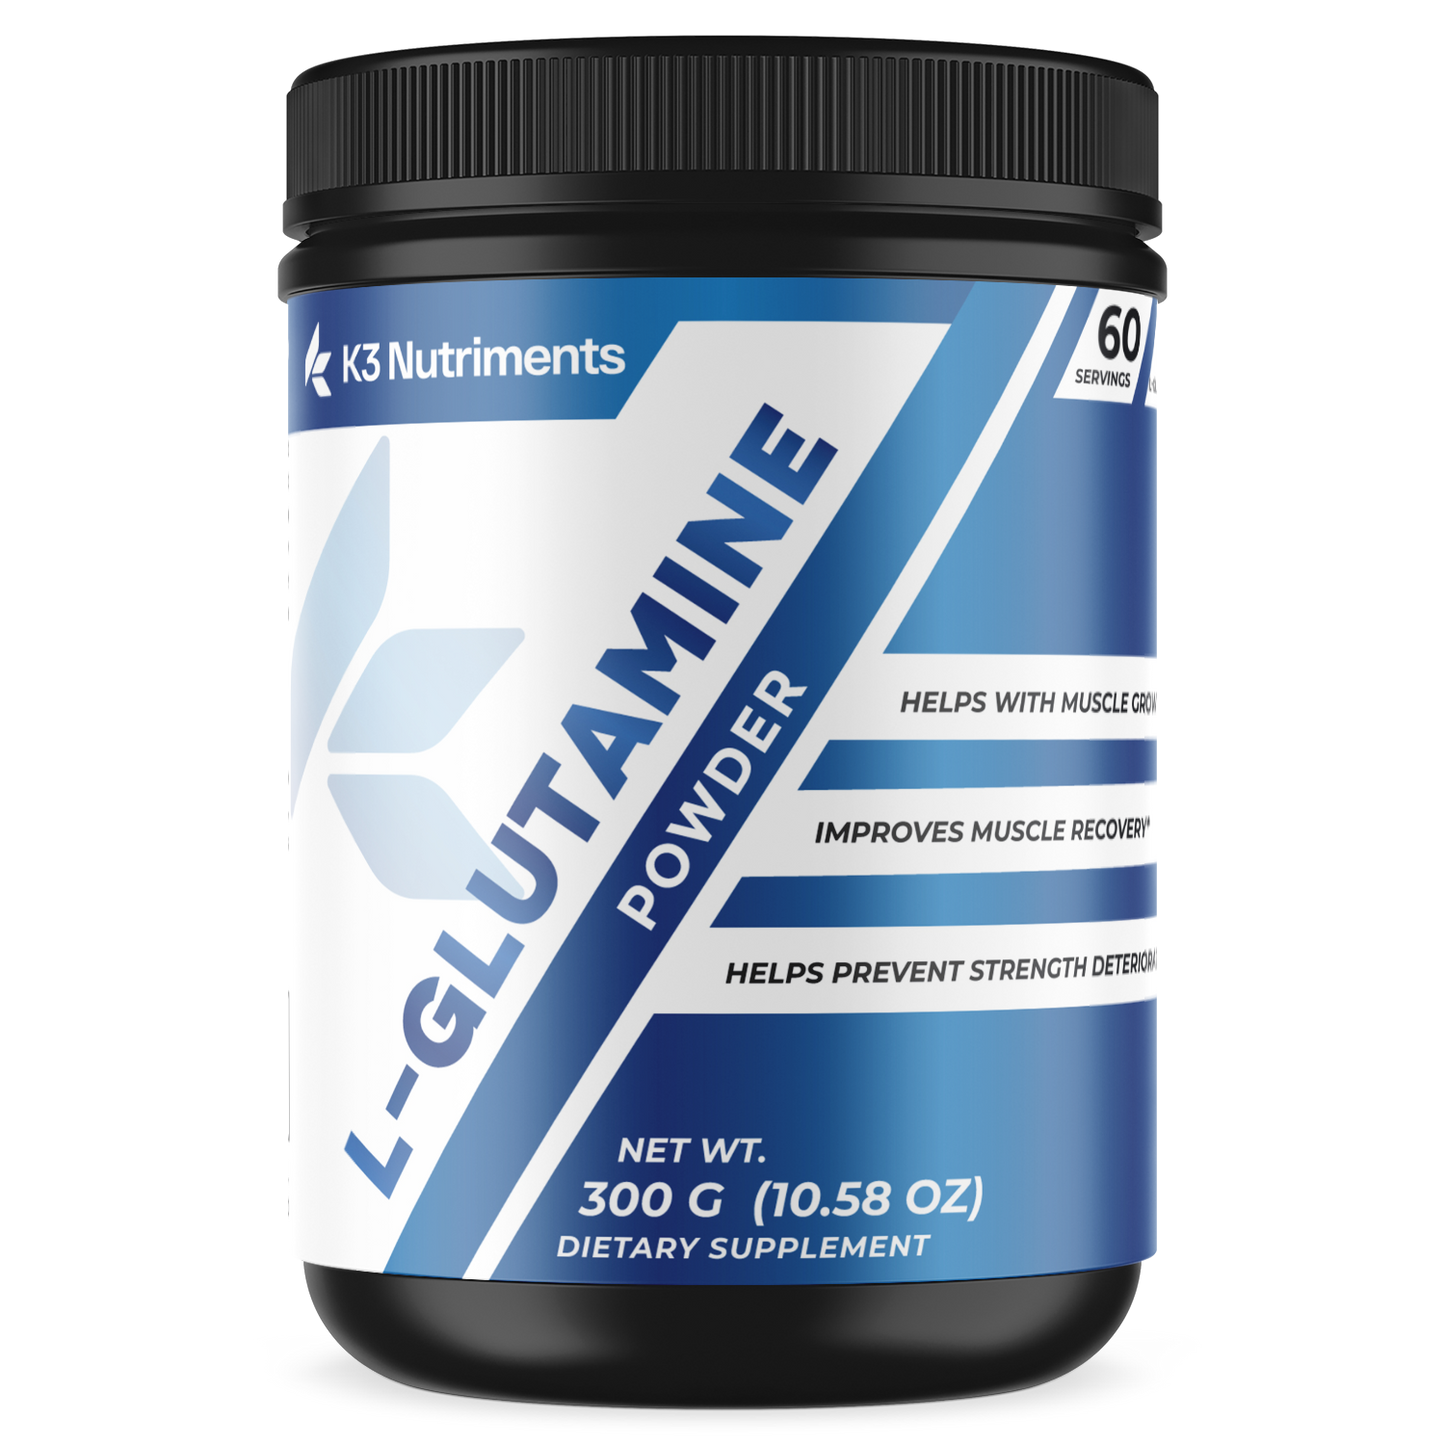 L-Glutamine (increases muscle growth)